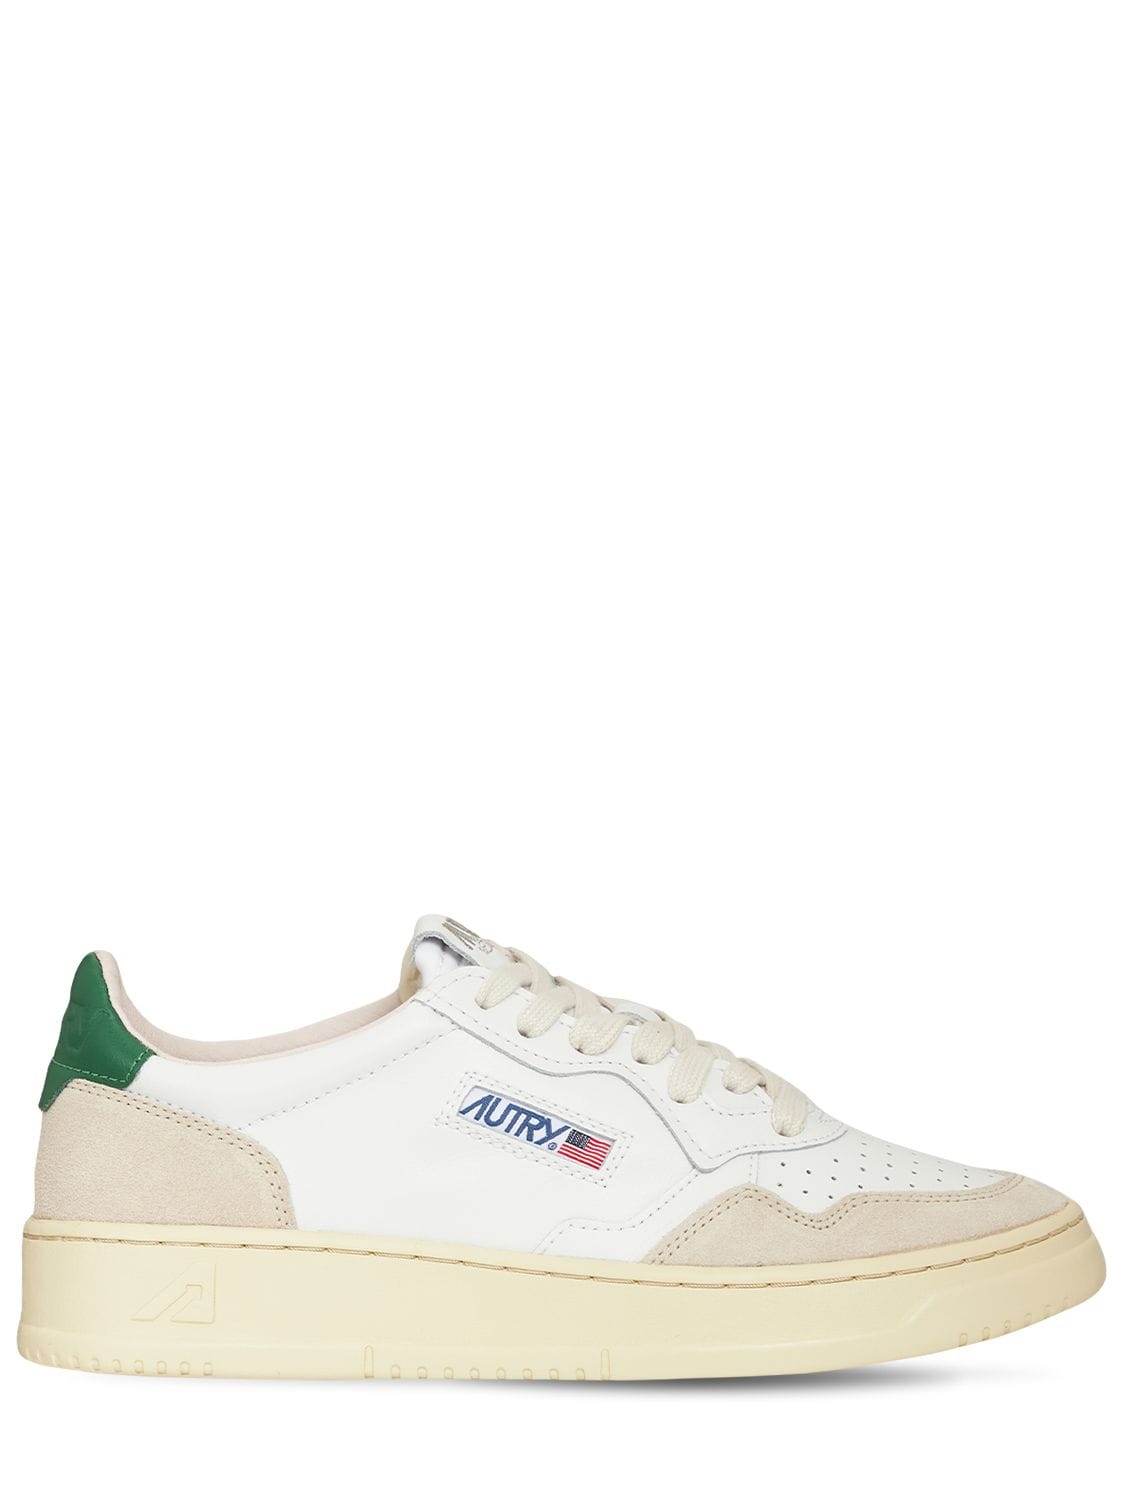 Autry - Medalist suede & leather low sneakers - | Luisaviaroma